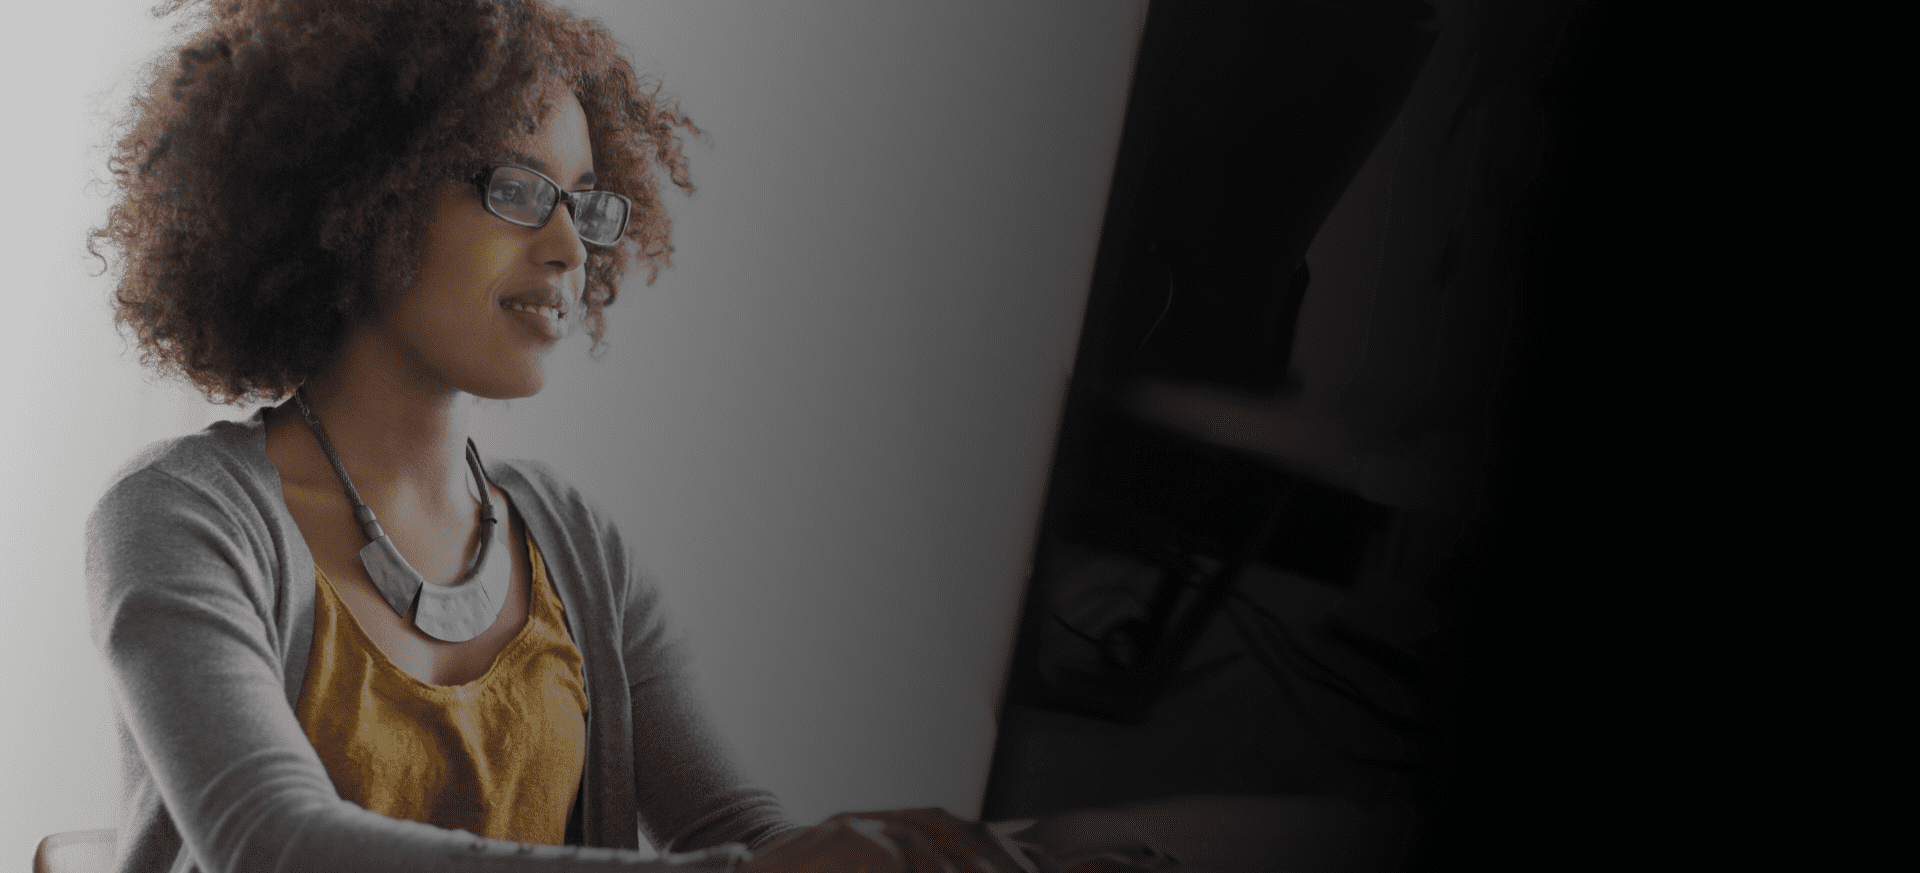 Woman with curly hair and glasses working on a computer.